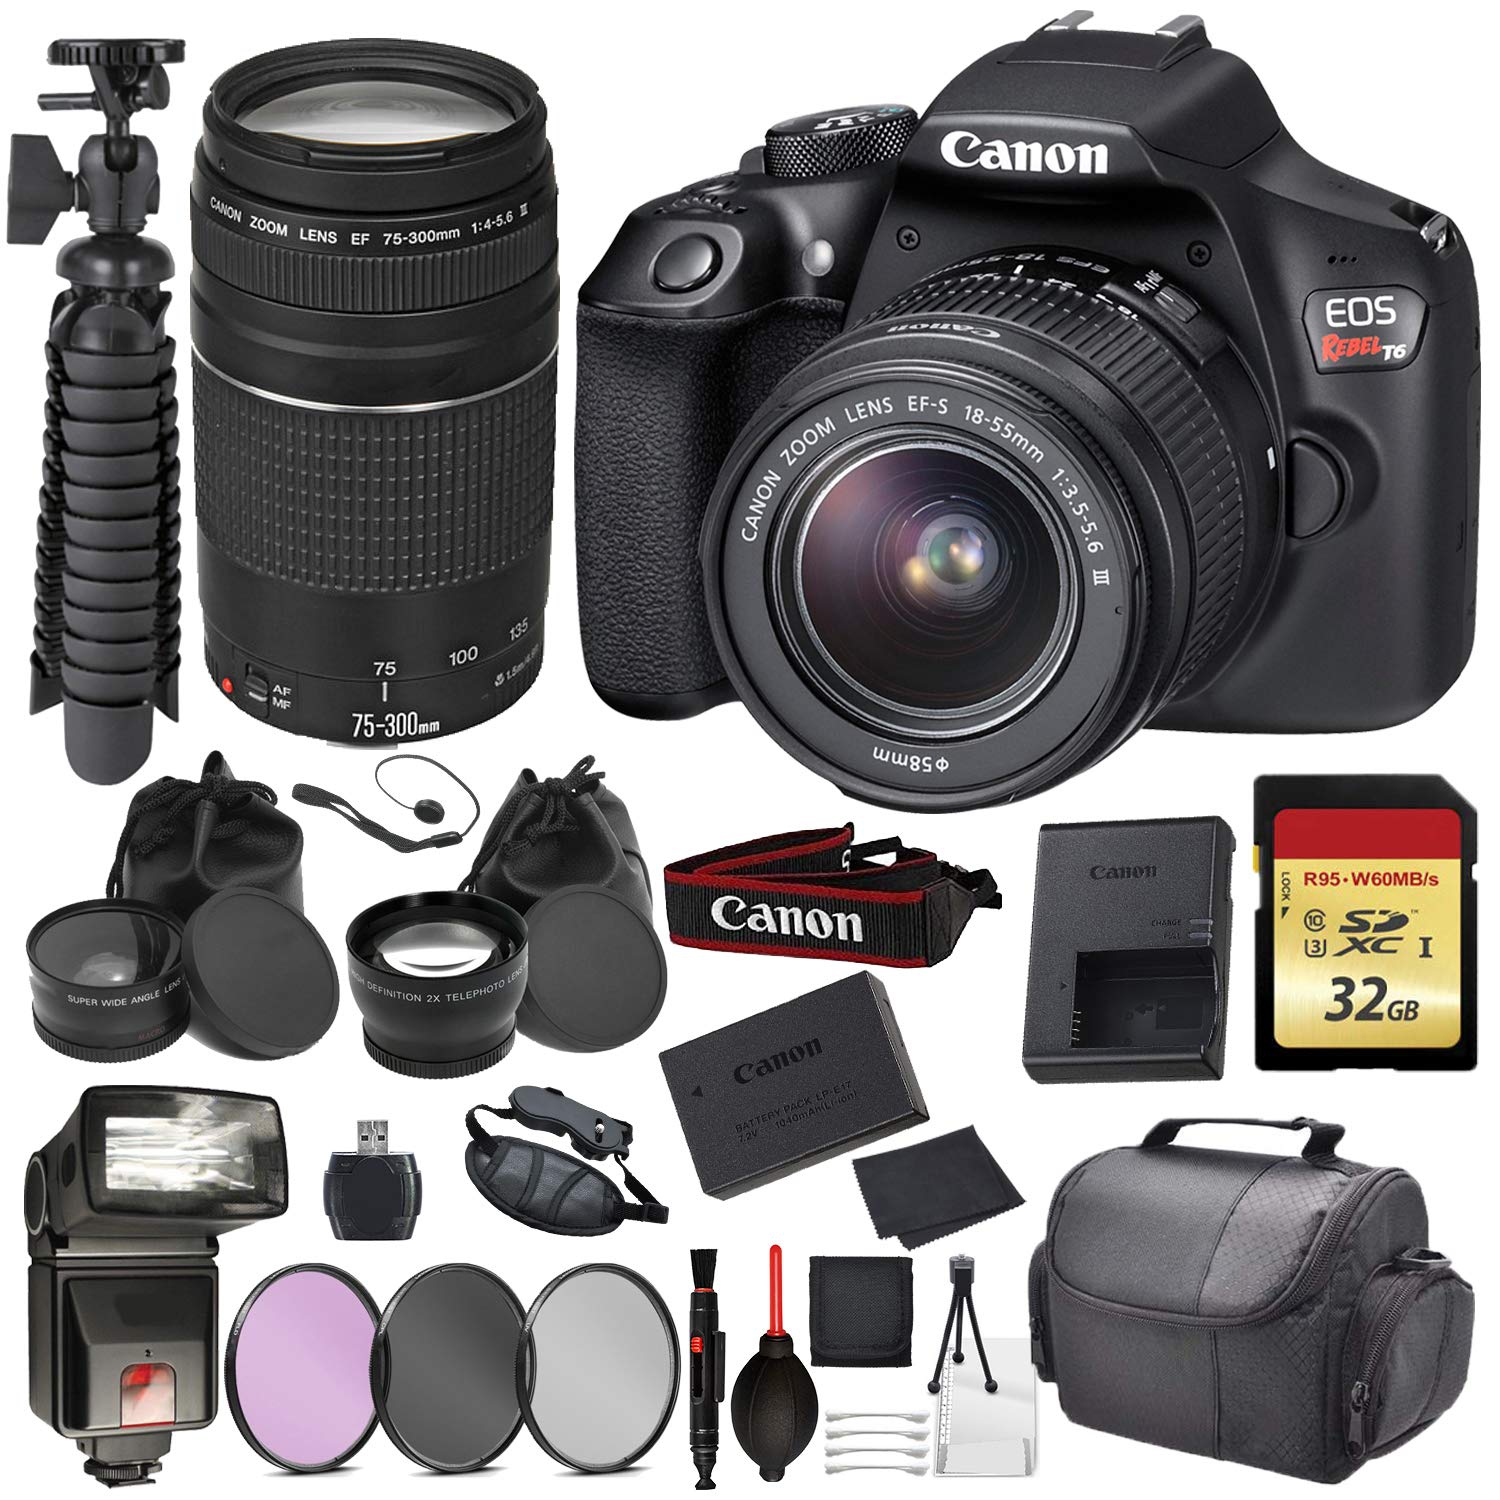 Canon EOS Rebel T6 Digital SLR Camera with EF-S 18-55mm + EF 75-300mm (Black) Essential Accessory Bundle Package Deal In